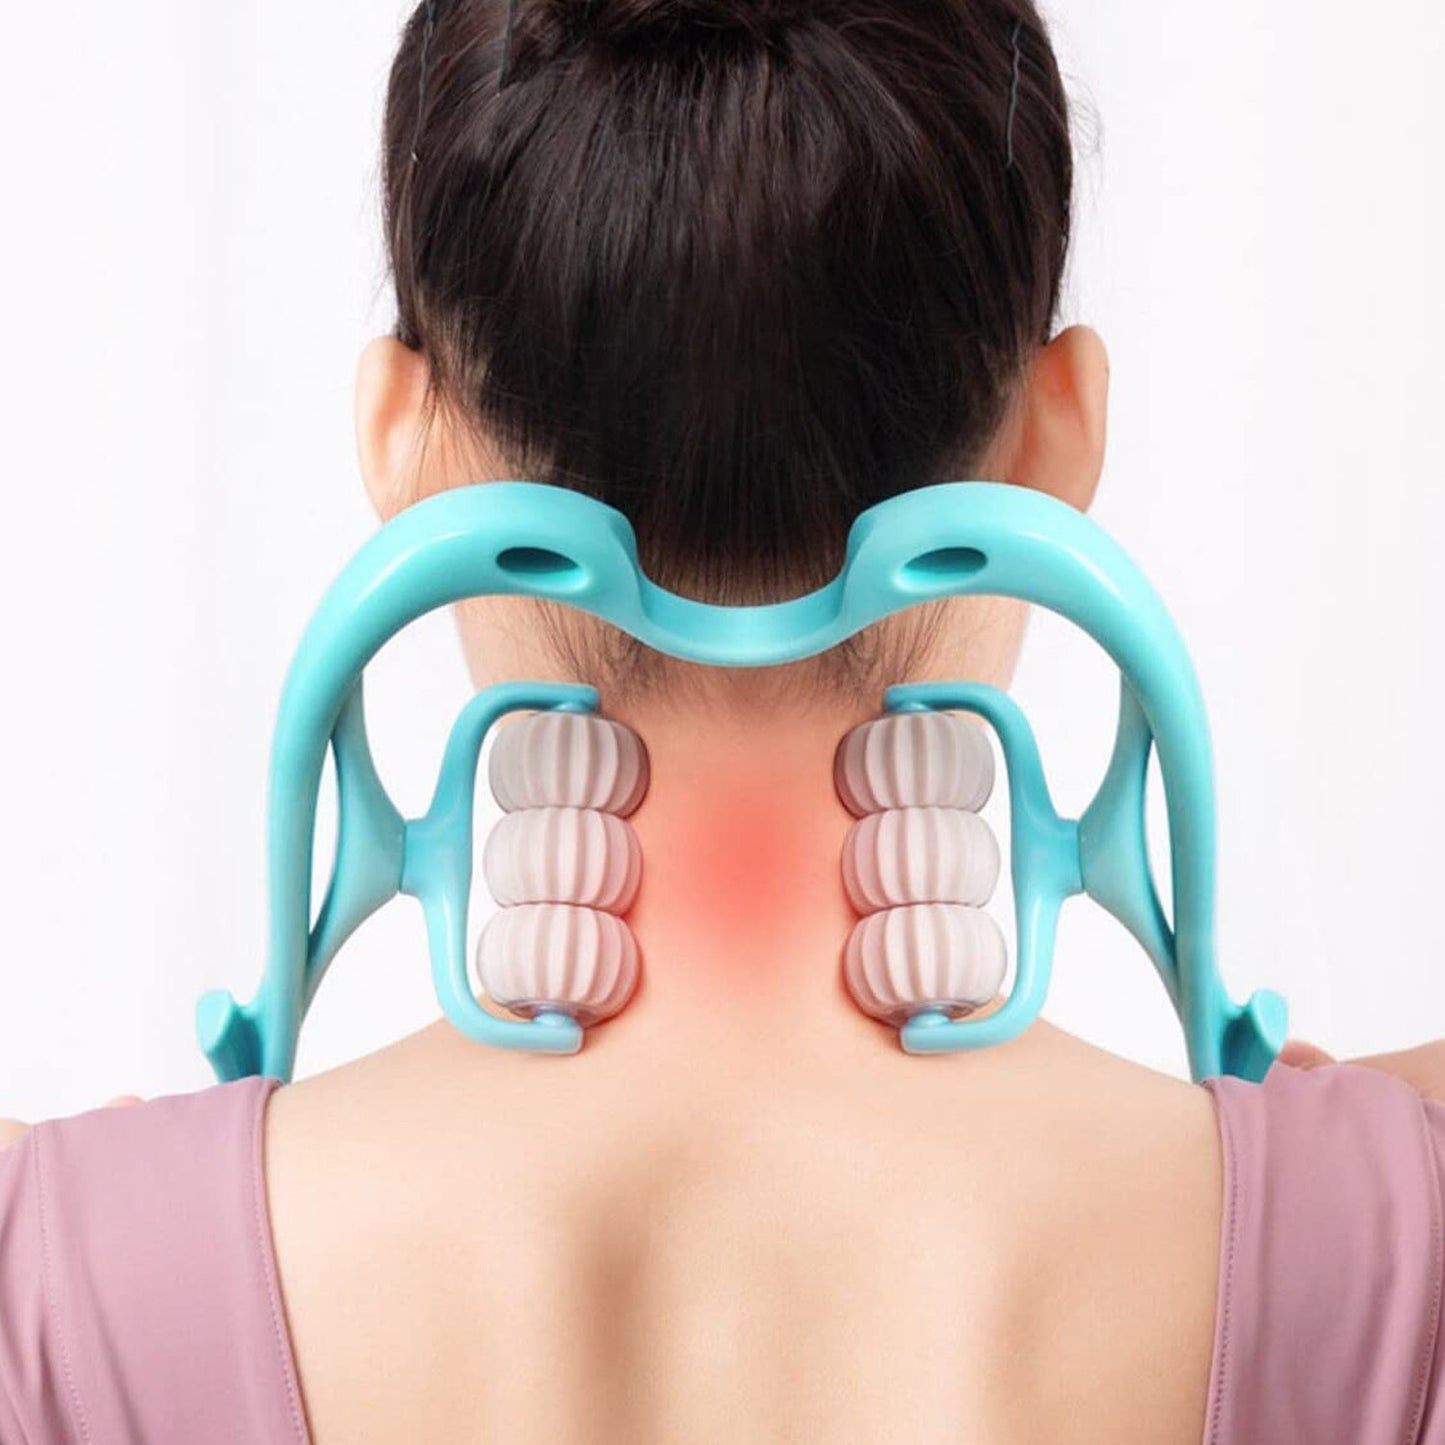 NECK SHOULDER MASSAGER, PORTABLE RELIEVING THE BACK FOR MEN RELIEVING THE WAIST WOMEN (1PC)